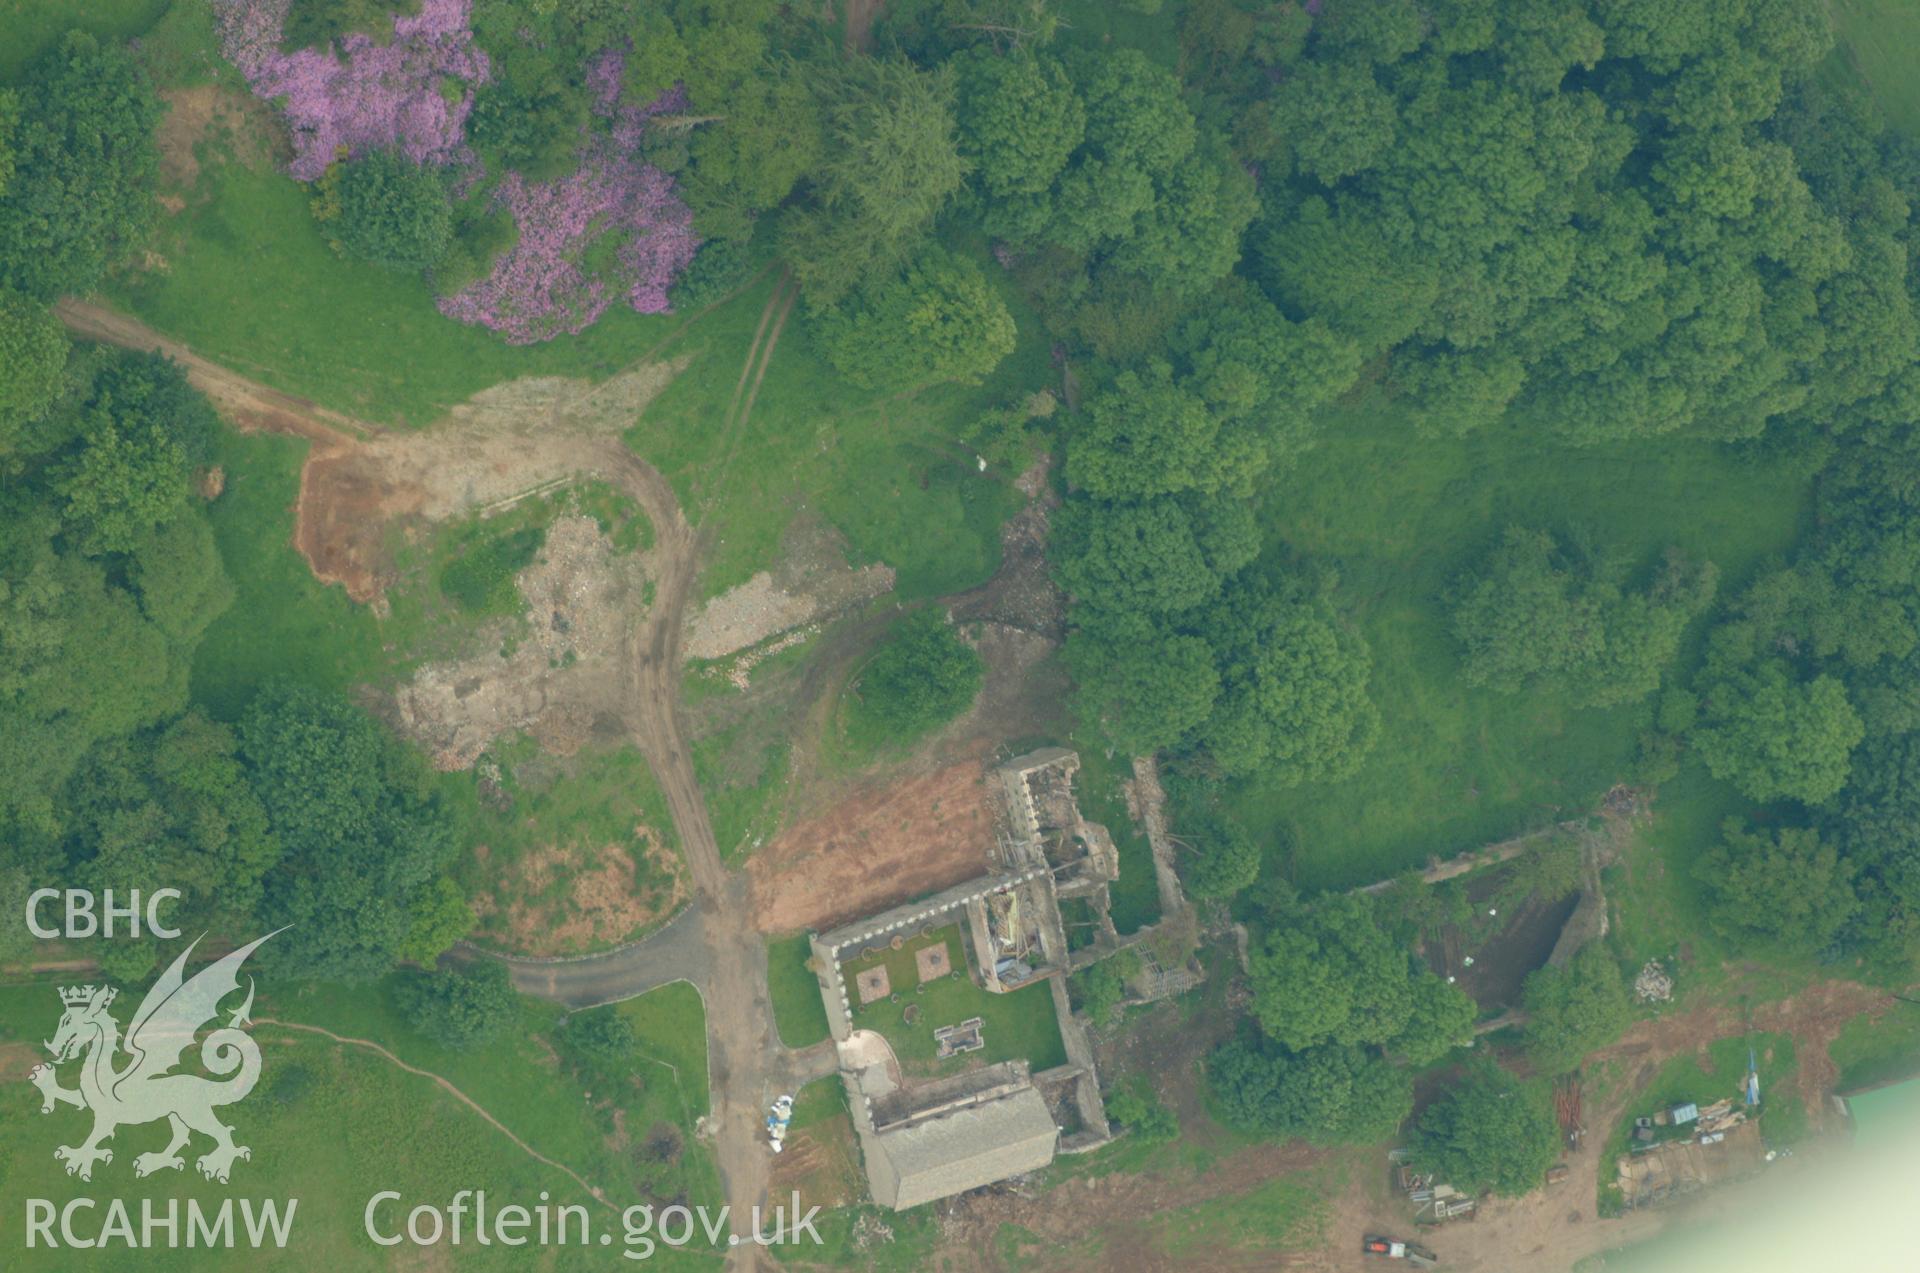 RCAHMW colour oblique aerial photograph of Dan-y-parc house taken on 26/05/2004 by Toby Driver